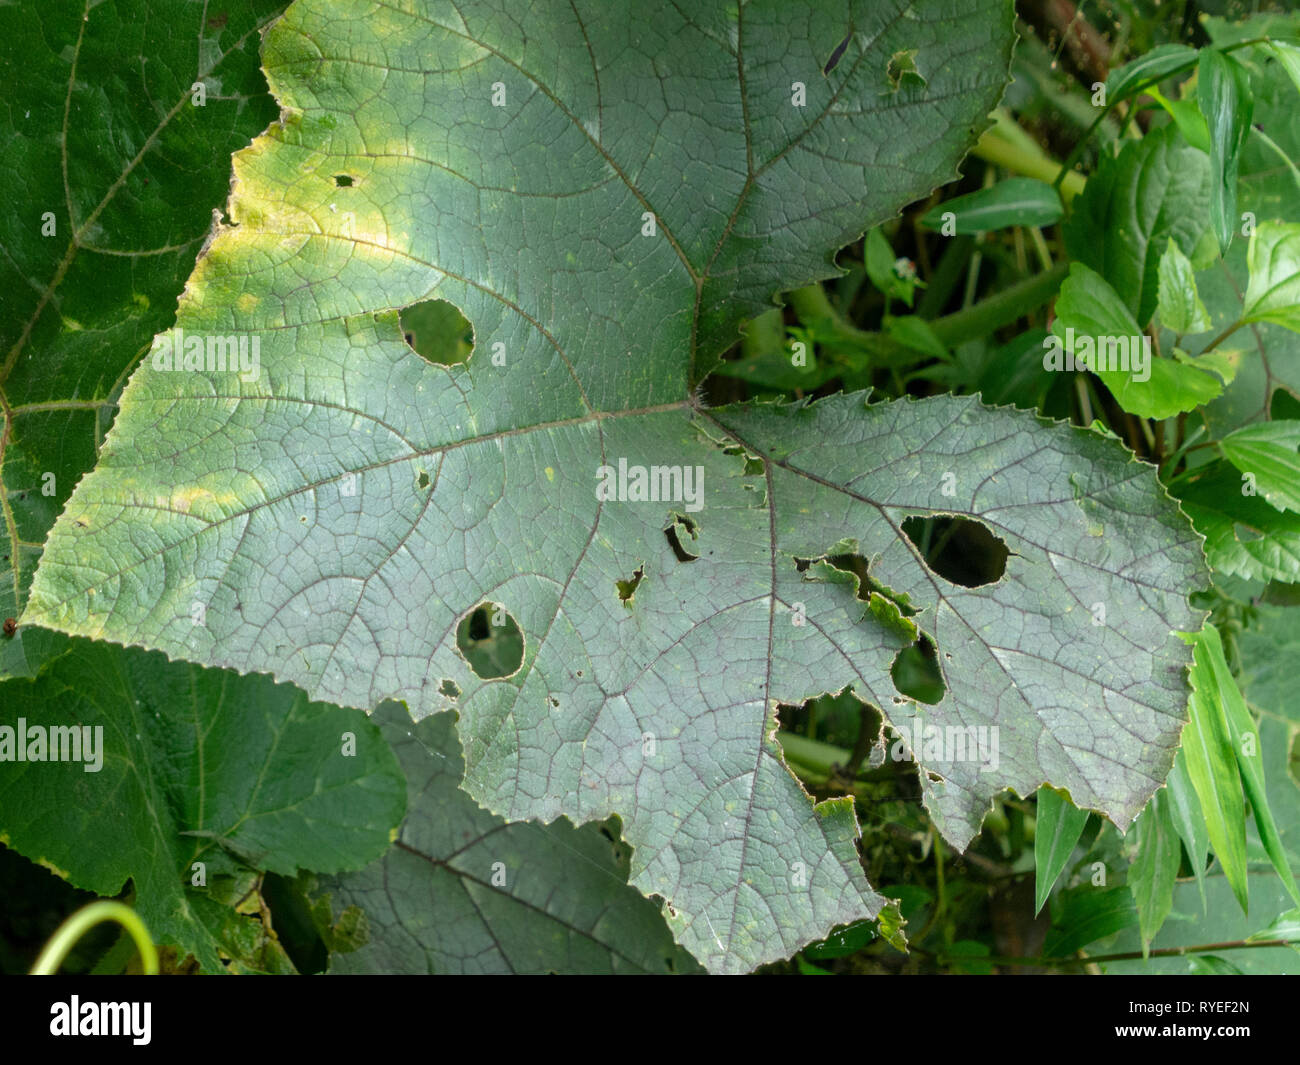 damaged crops. An agricultural pest has been feeding off the leafs. Photographed in Yunnan province, China, along the Red River. Photographed in Septe Stock Photo